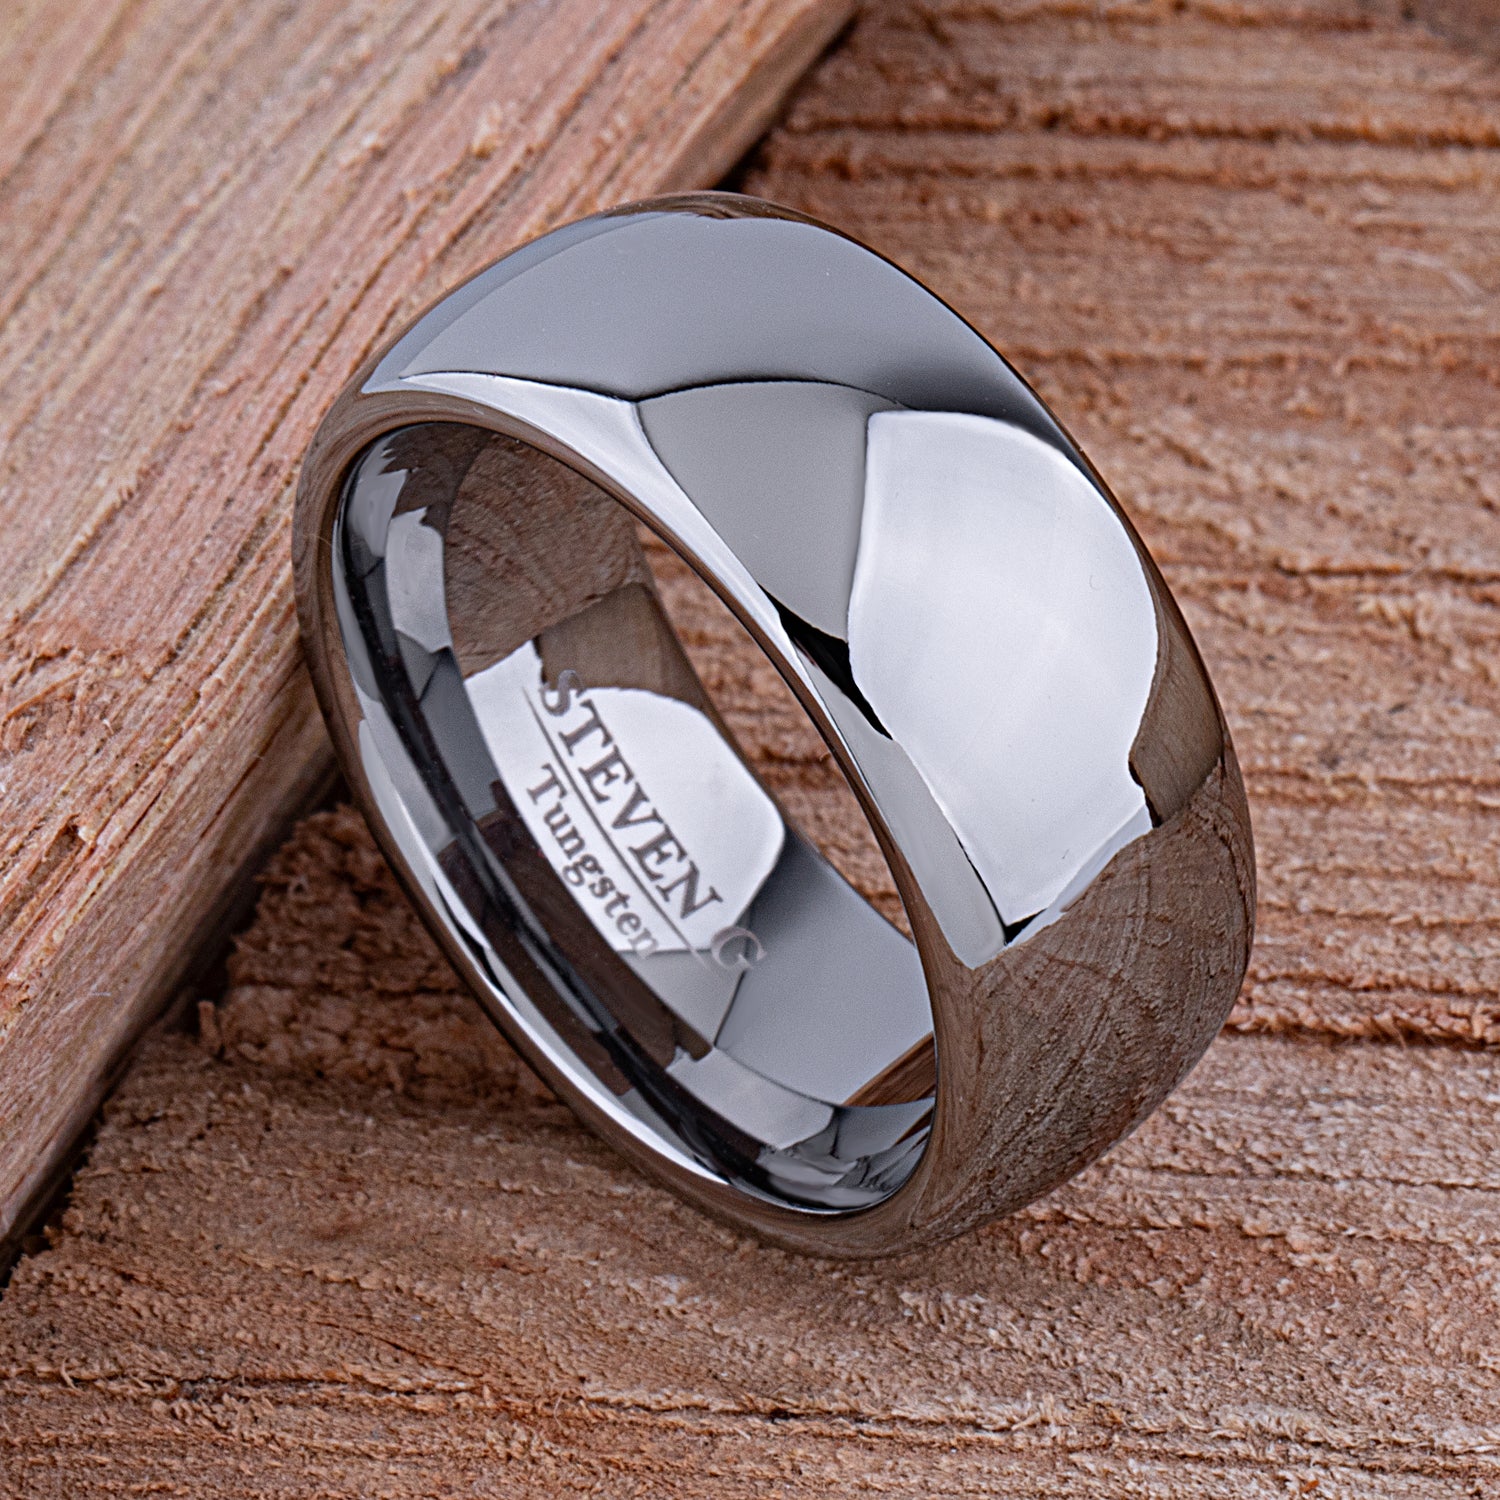 Men's Wedding Bands: Should You Choose Yellow Gold, White Gold or Platinum?